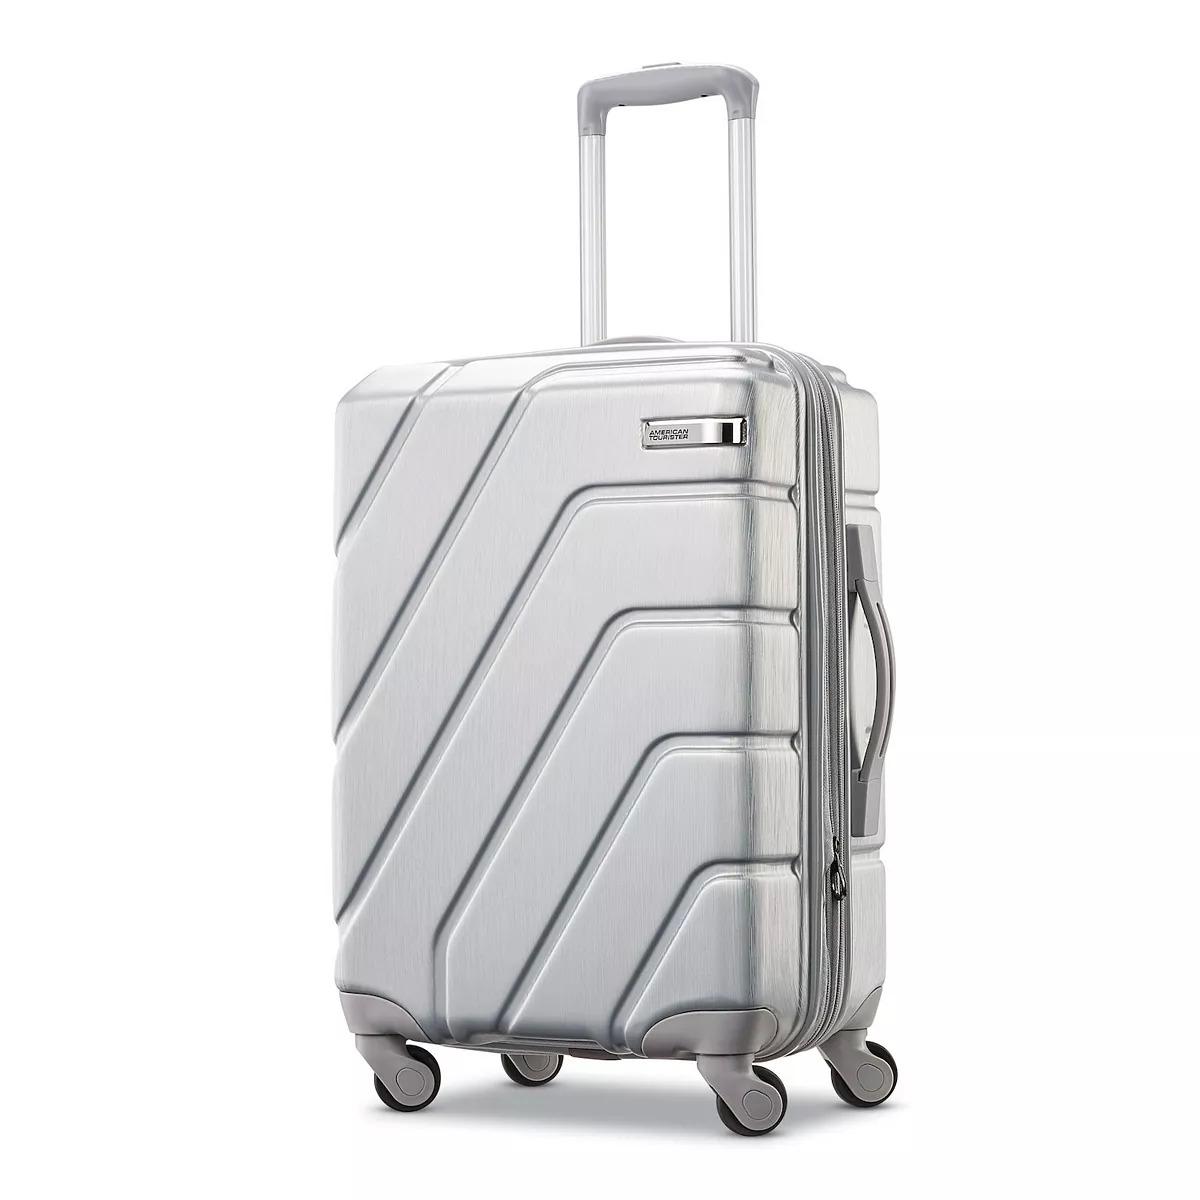 American Tourister Burst Max Trio Spinner Luggage for $67.99 Shipped